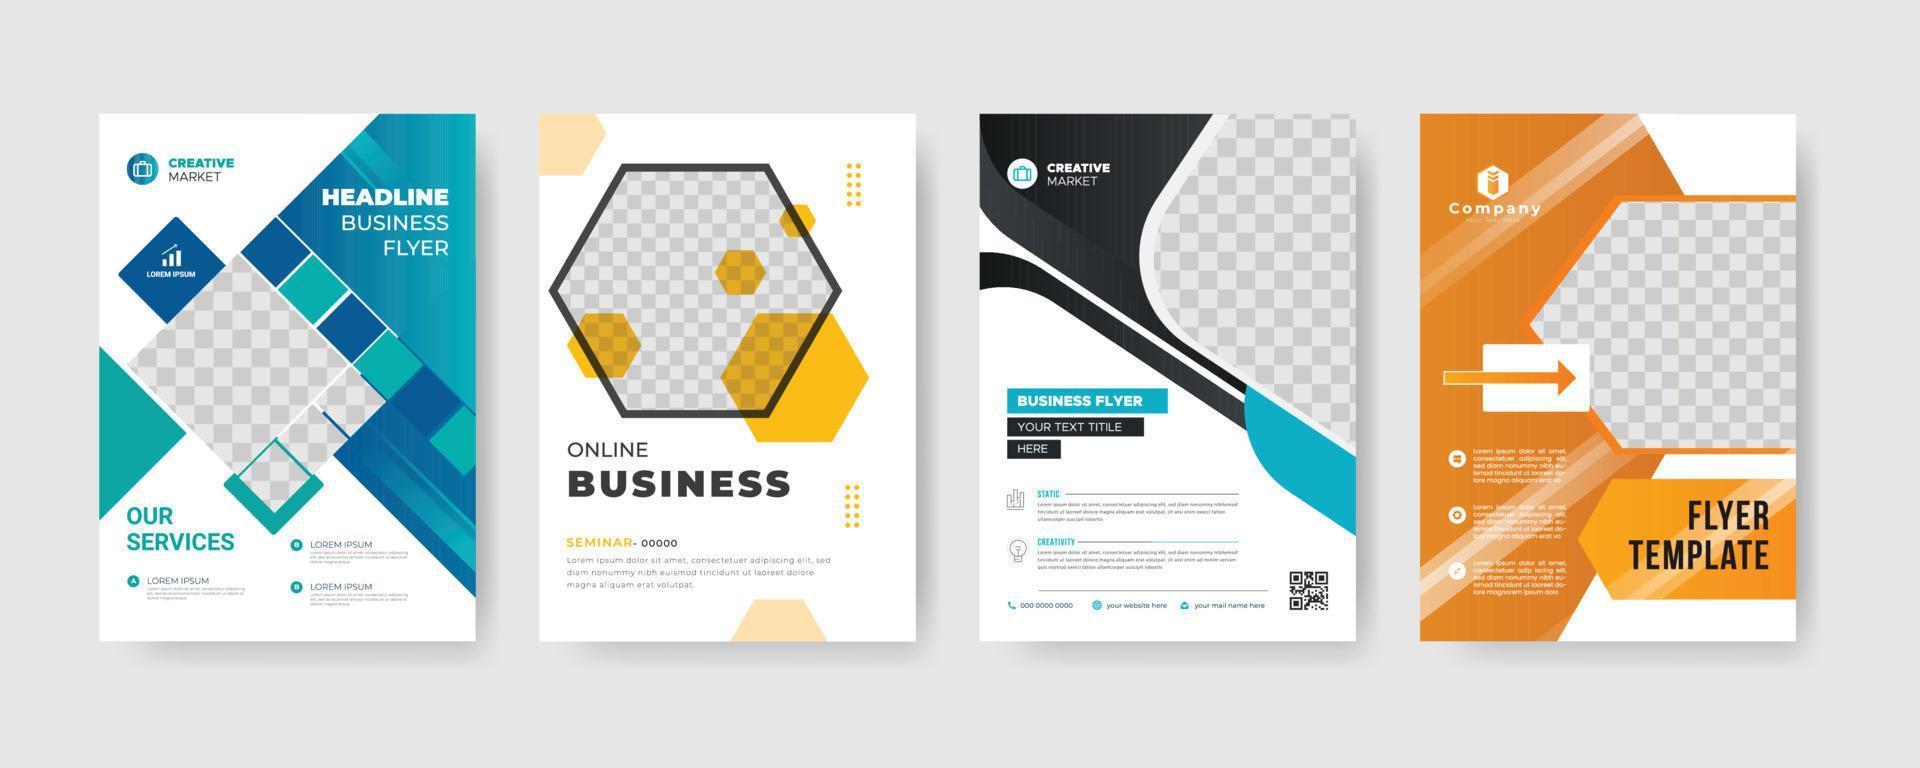 corporate business flyer template with color variation geometric shapes vector